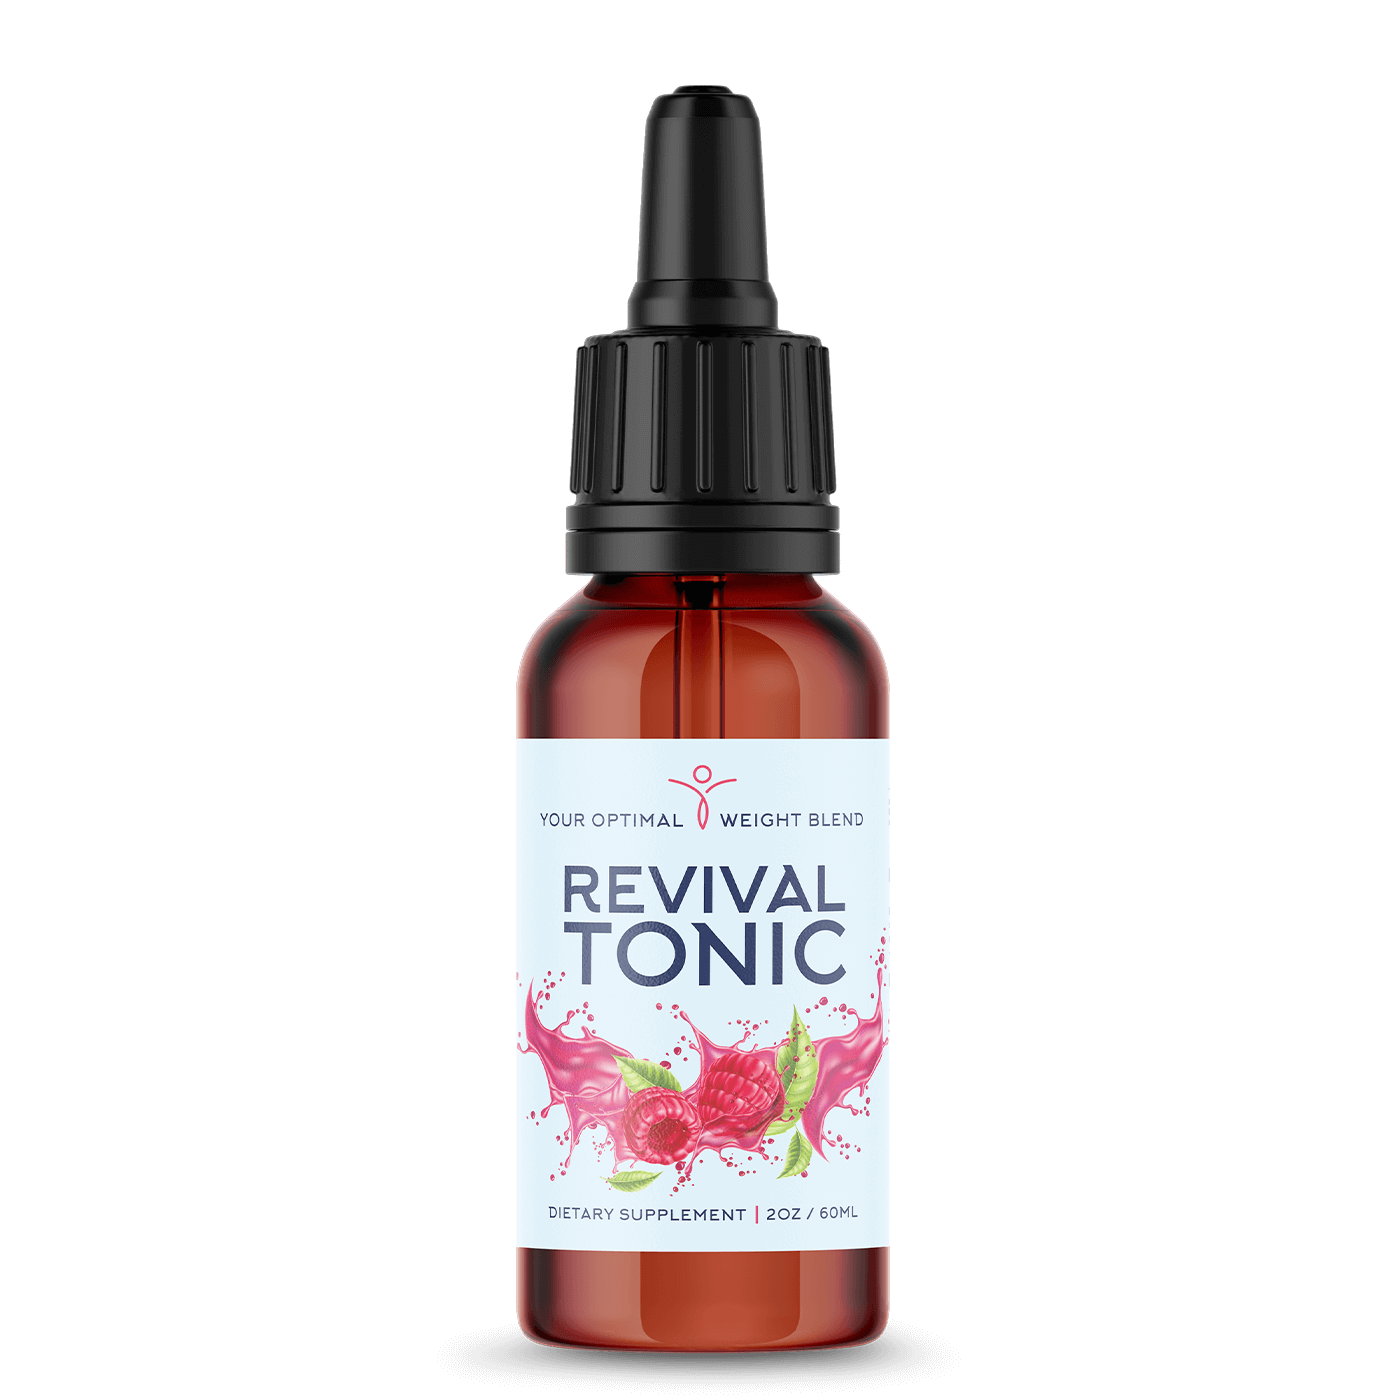 How To Lose Fat : Revival Tonic